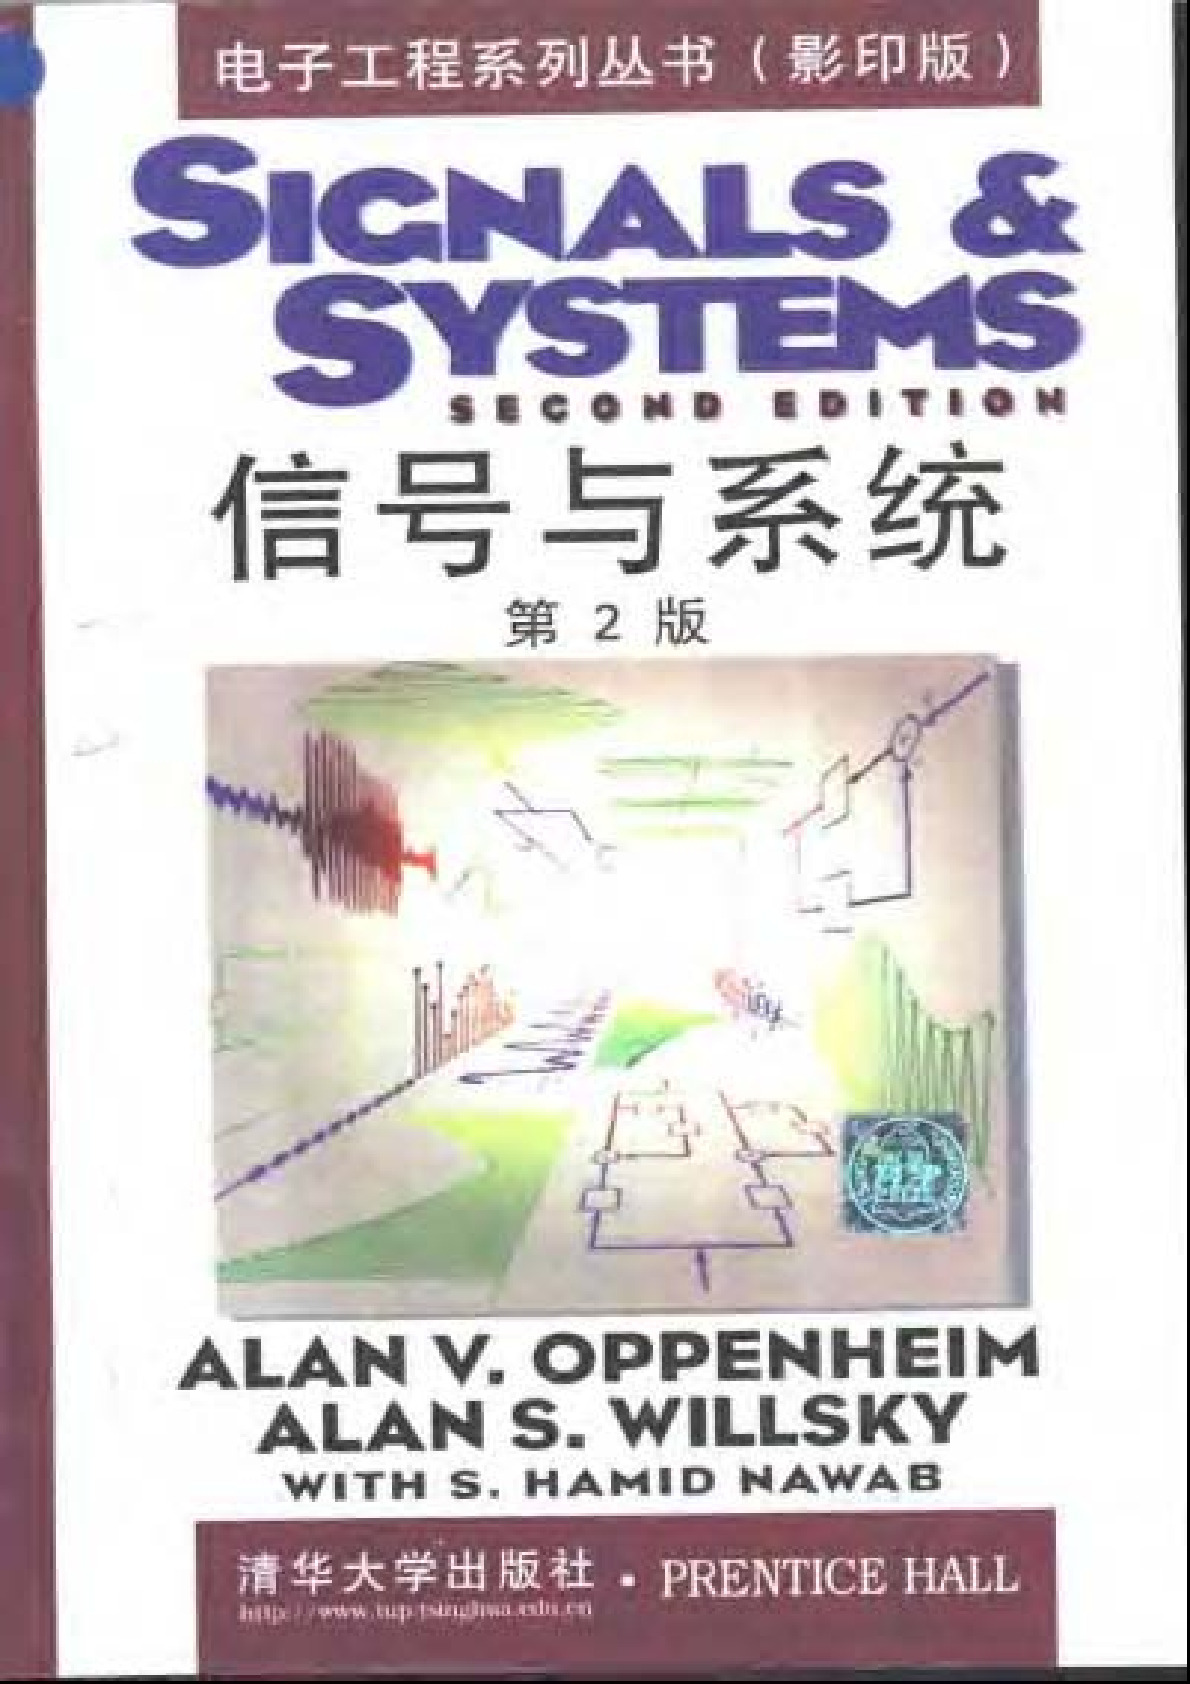 Alan V. Oppenheim, Alan S. Willsky, with S. Hamid Signals and Systems